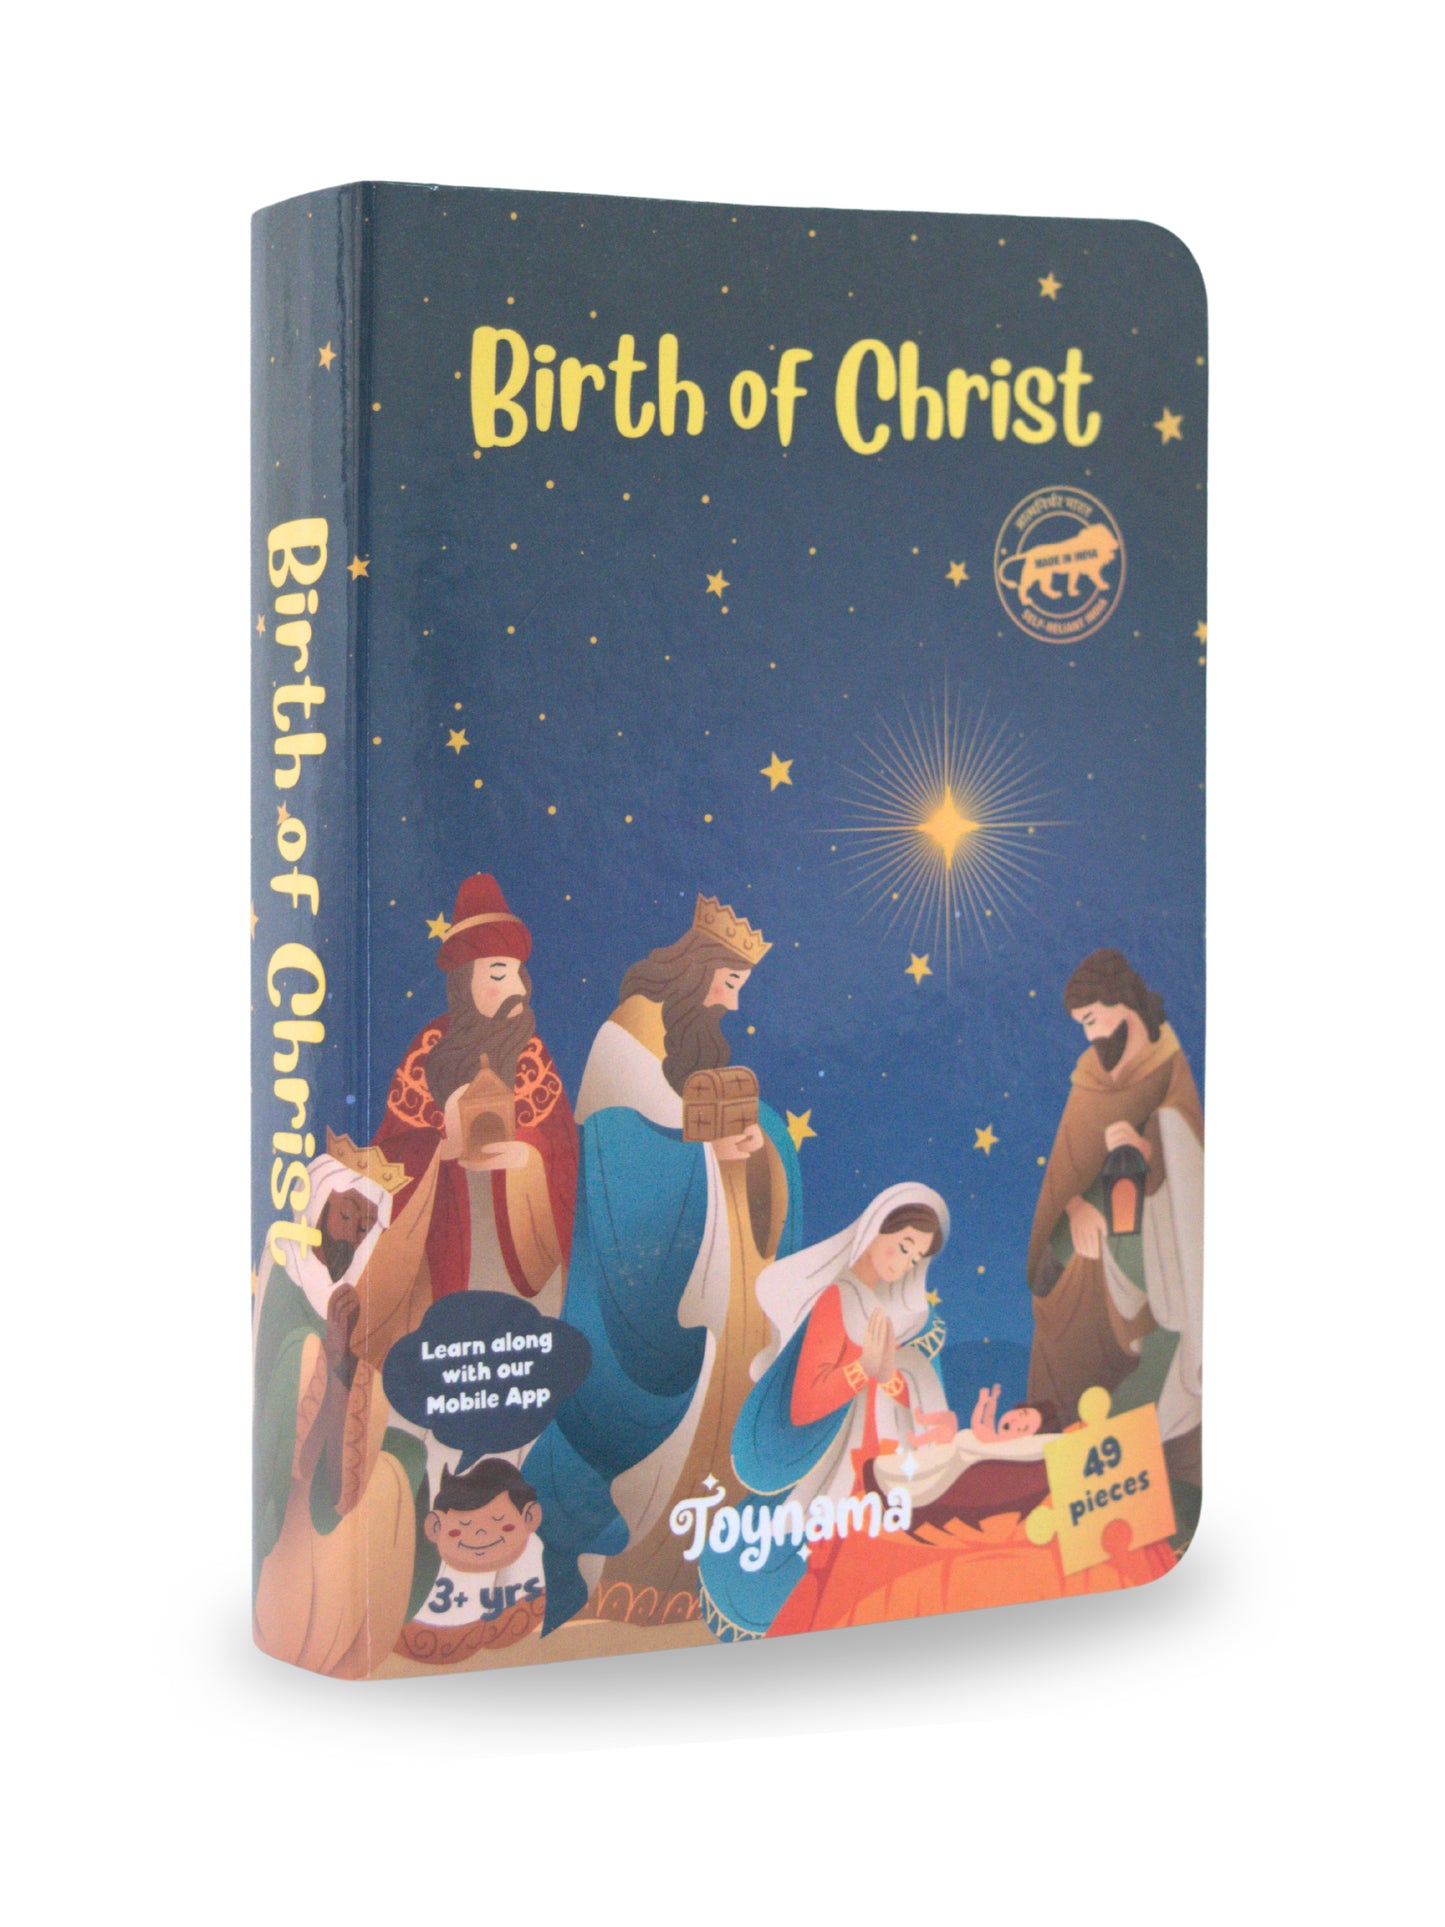 Buddhas Bodhi, Birth of Christ 49 Pcs Set of 2 Jigsaw Puzzles Ages 3+